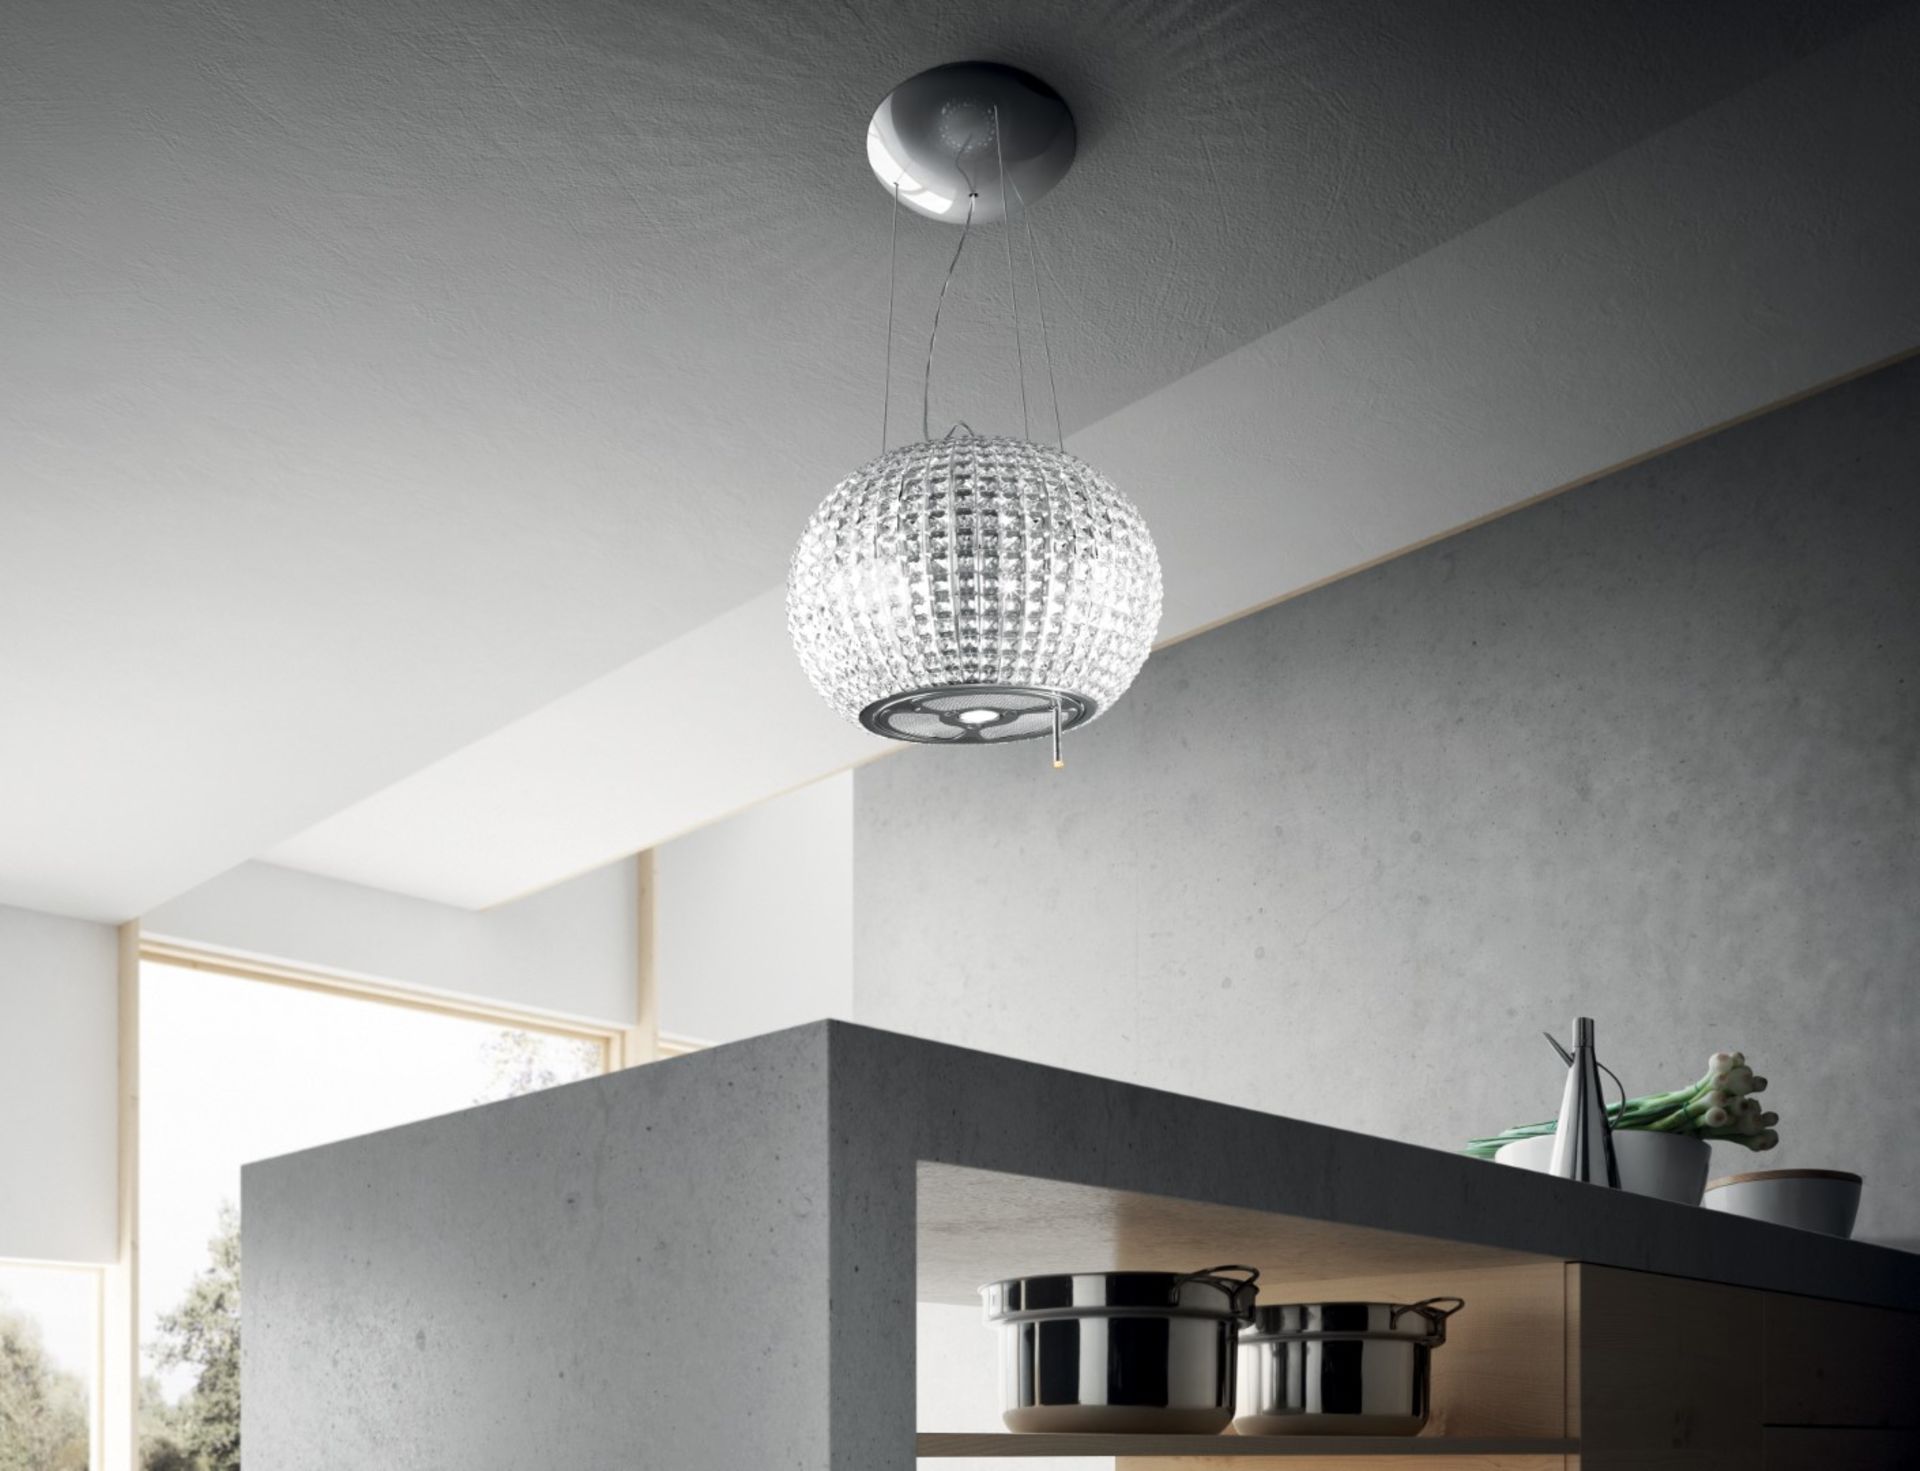 1 x Elica Celestial Island Glass Prism Spherical Extractor Hood Light - CL380 - Includes Suspended - Image 8 of 8